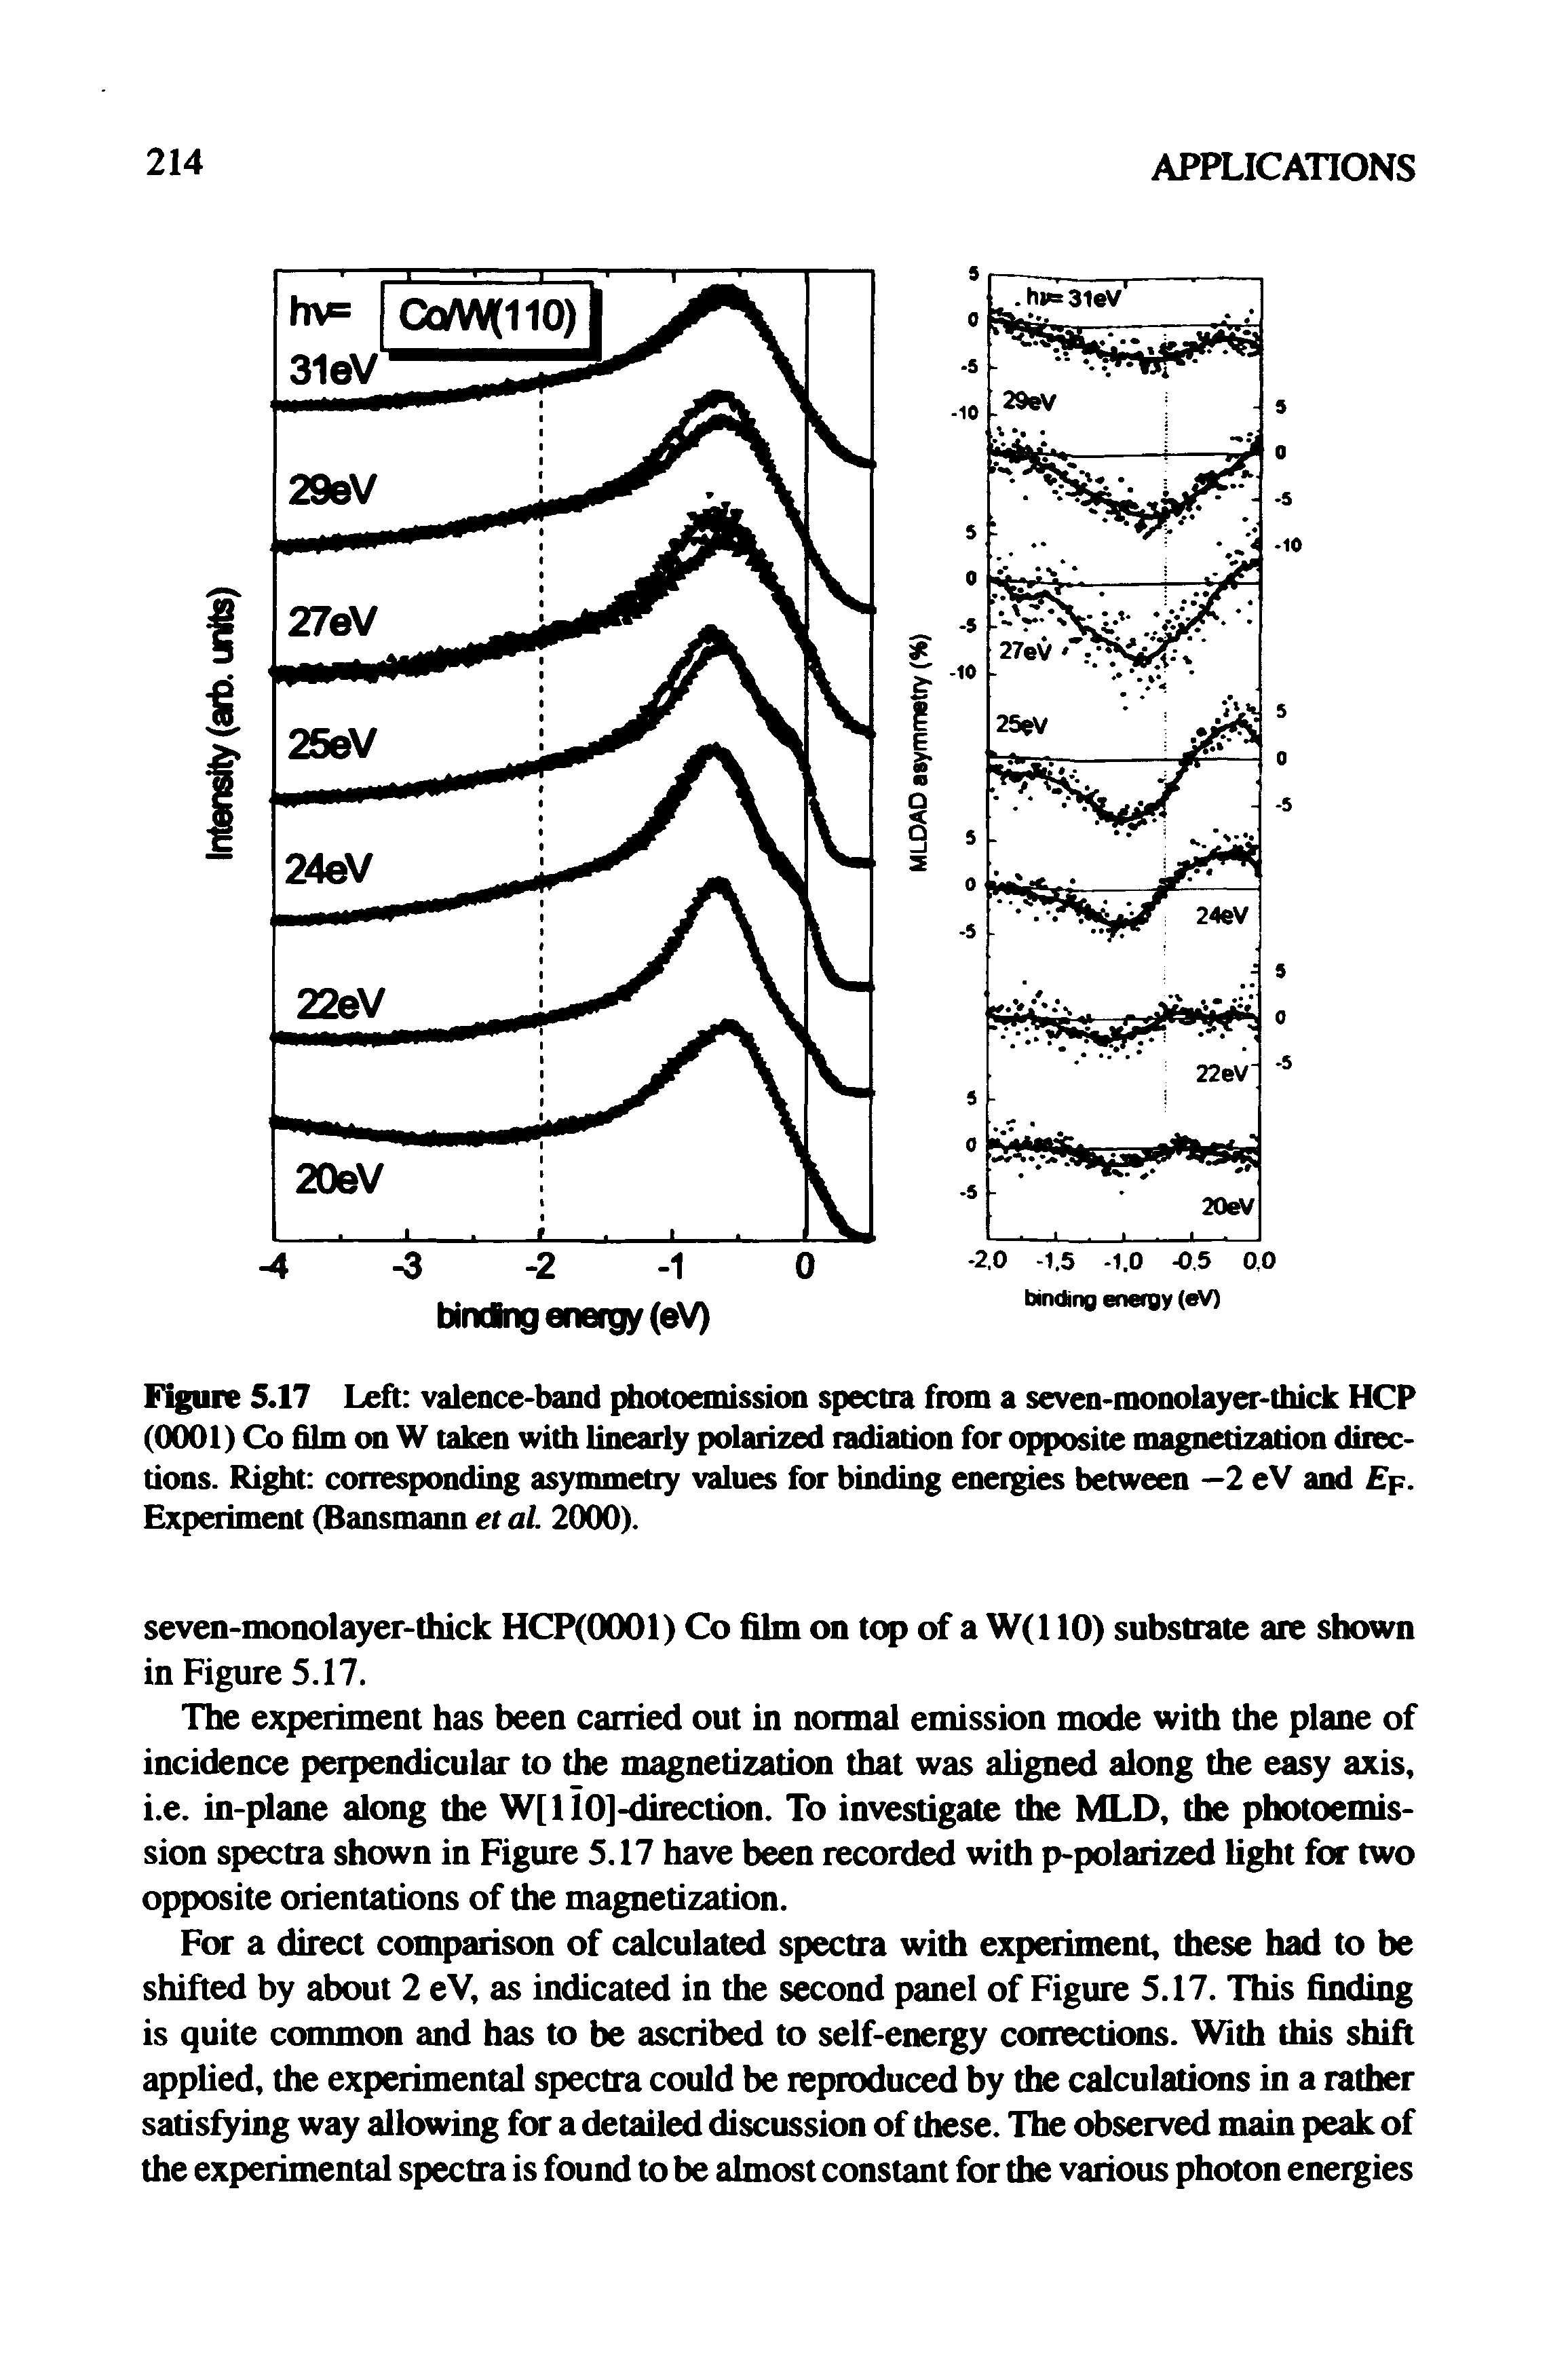 Figure 5.17 Left valence-band photoemission spectra from a seven-monolayer-thick HCP (0001) Co film on W taken with linearly polarized radiation for opposite magnetization directions. Right corresponding asymmetry values for binding energies between —2 eV and Ep-Experiment (Bansmann et al. 2000).